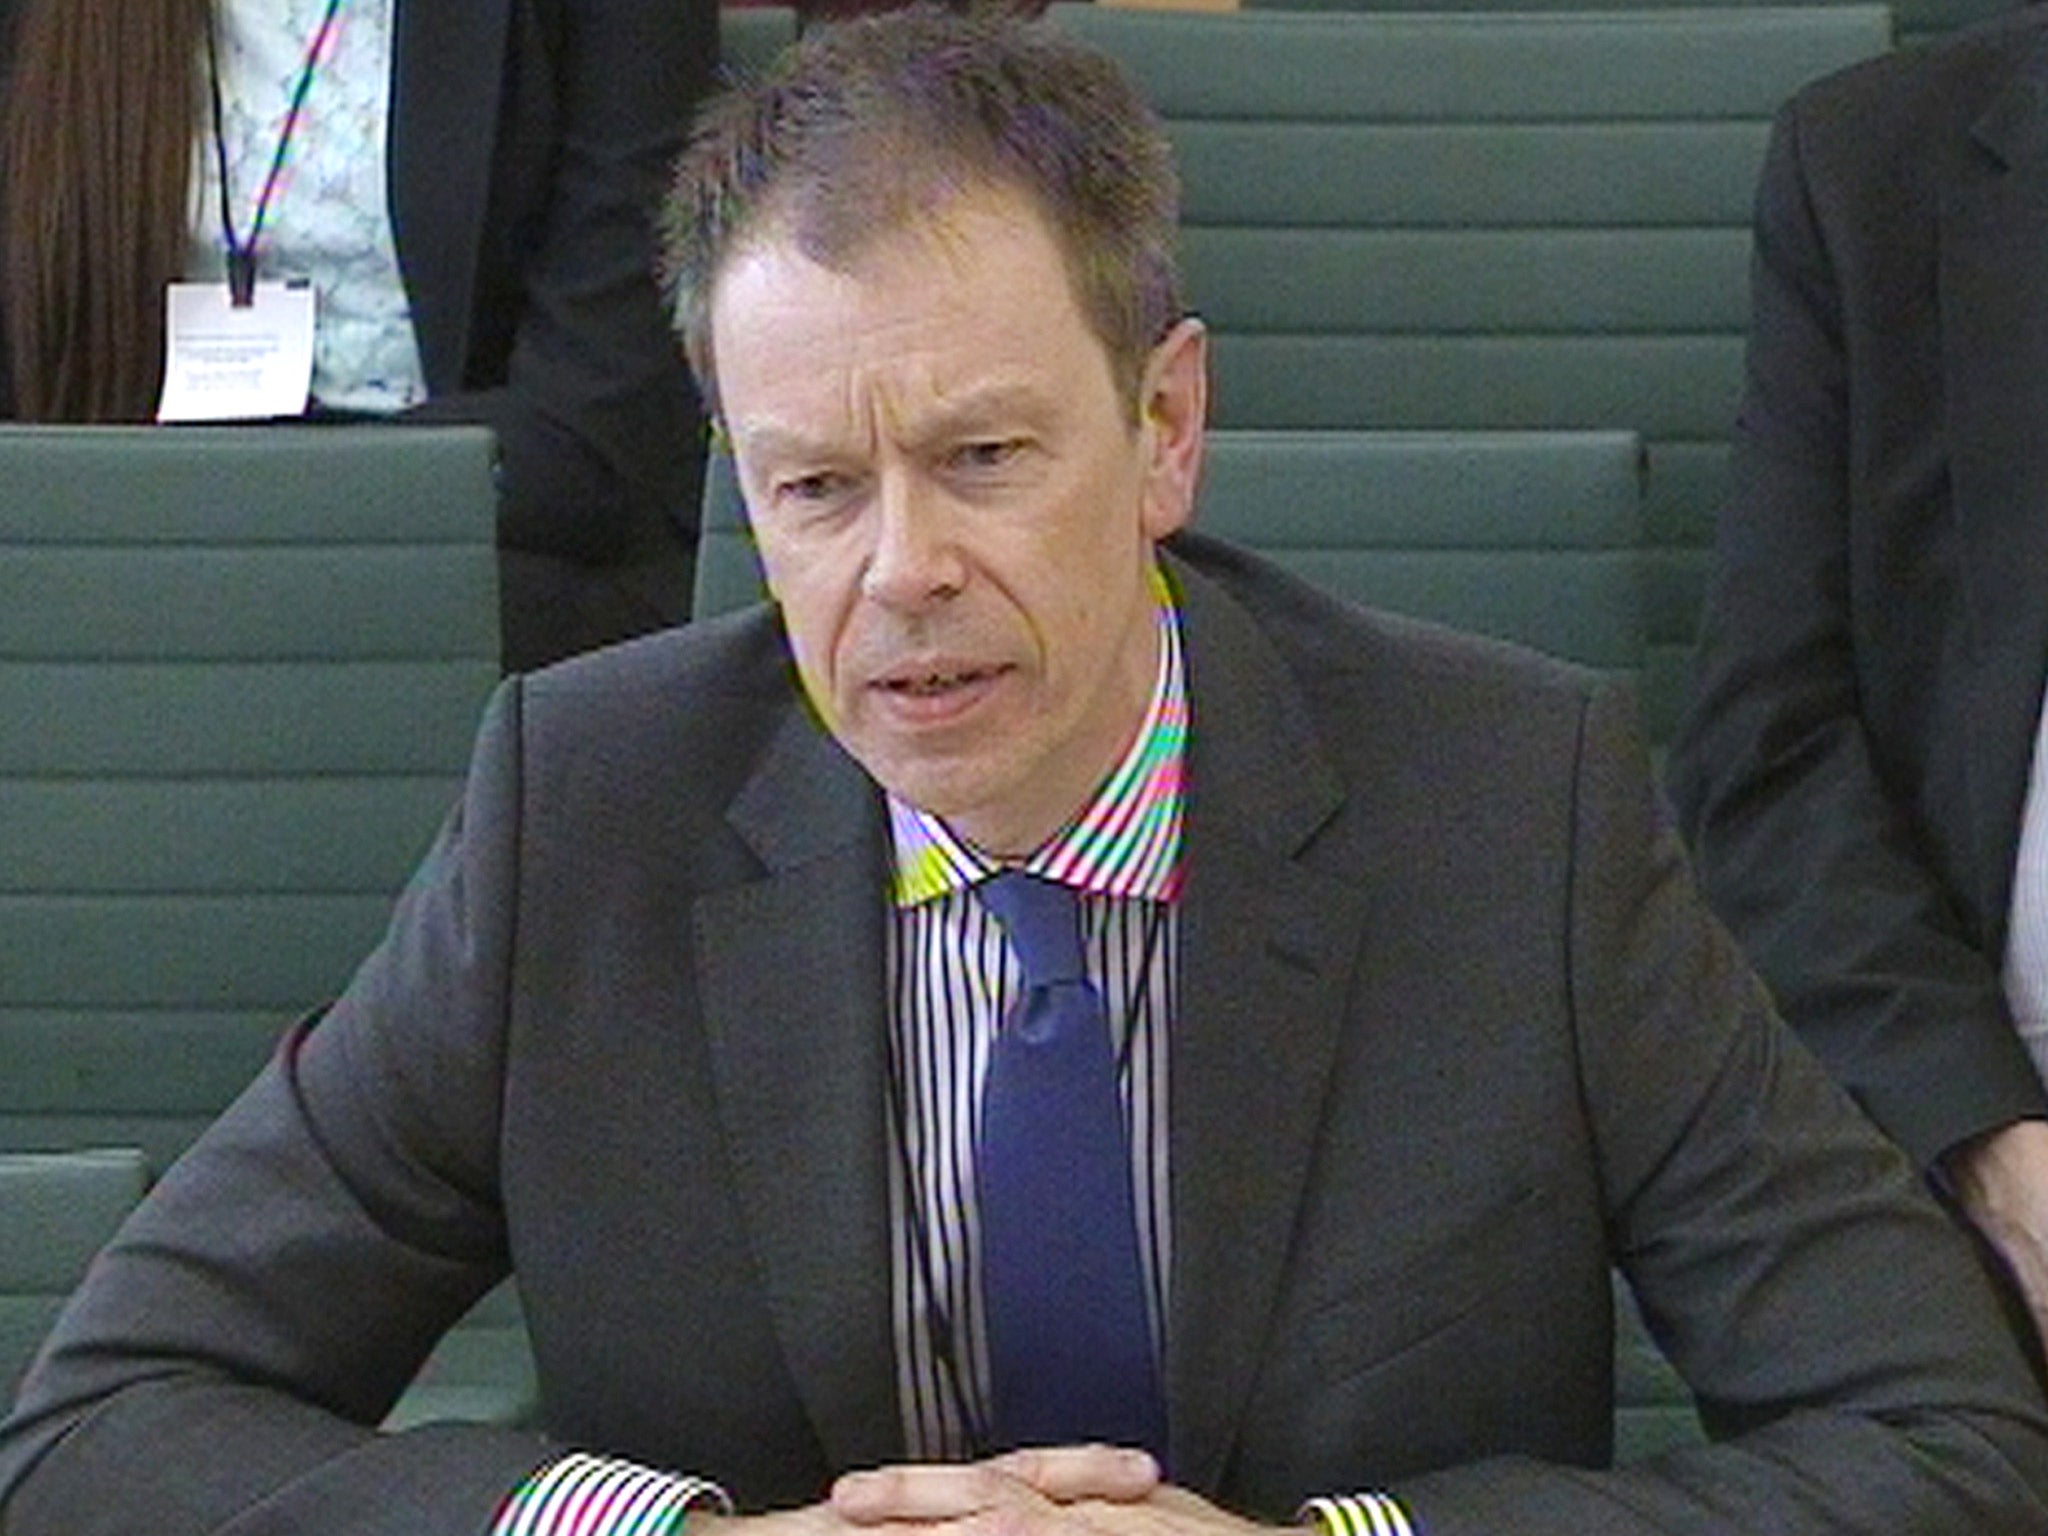 The head of the Passport Office, Paul Pugh gives evidence to Commons Home Affairs Committee